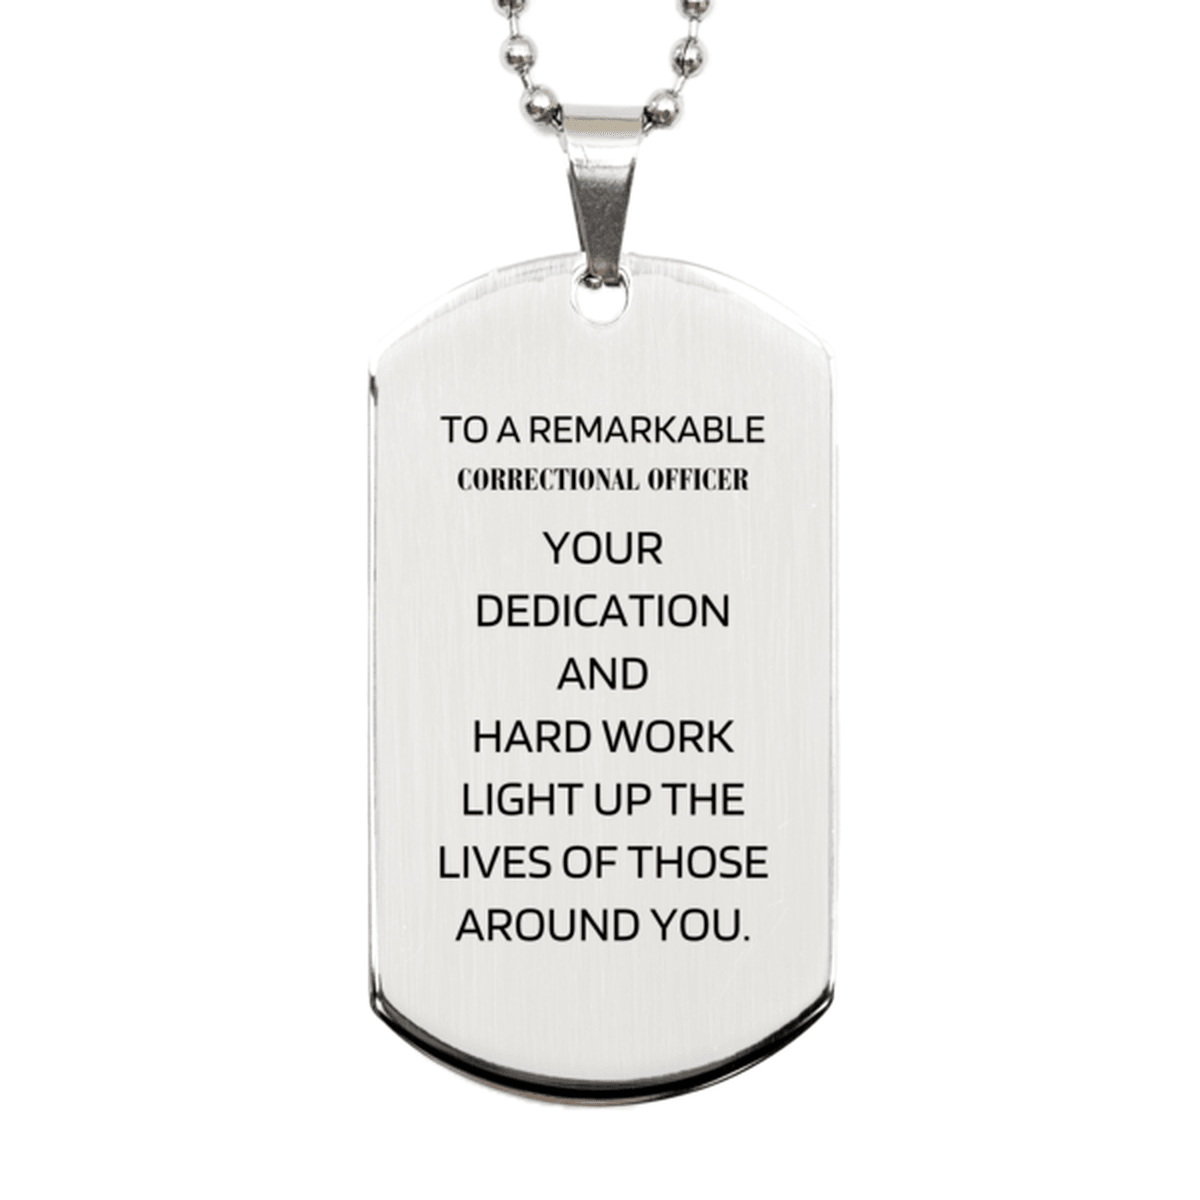 Remarkable Correctional Officer Gifts, Your dedication and hard work, Inspirational Birthday Christmas Unique Silver Dog Tag For Correctional Officer, Coworkers, Men, Women, Friends - Mallard Moon Gift Shop